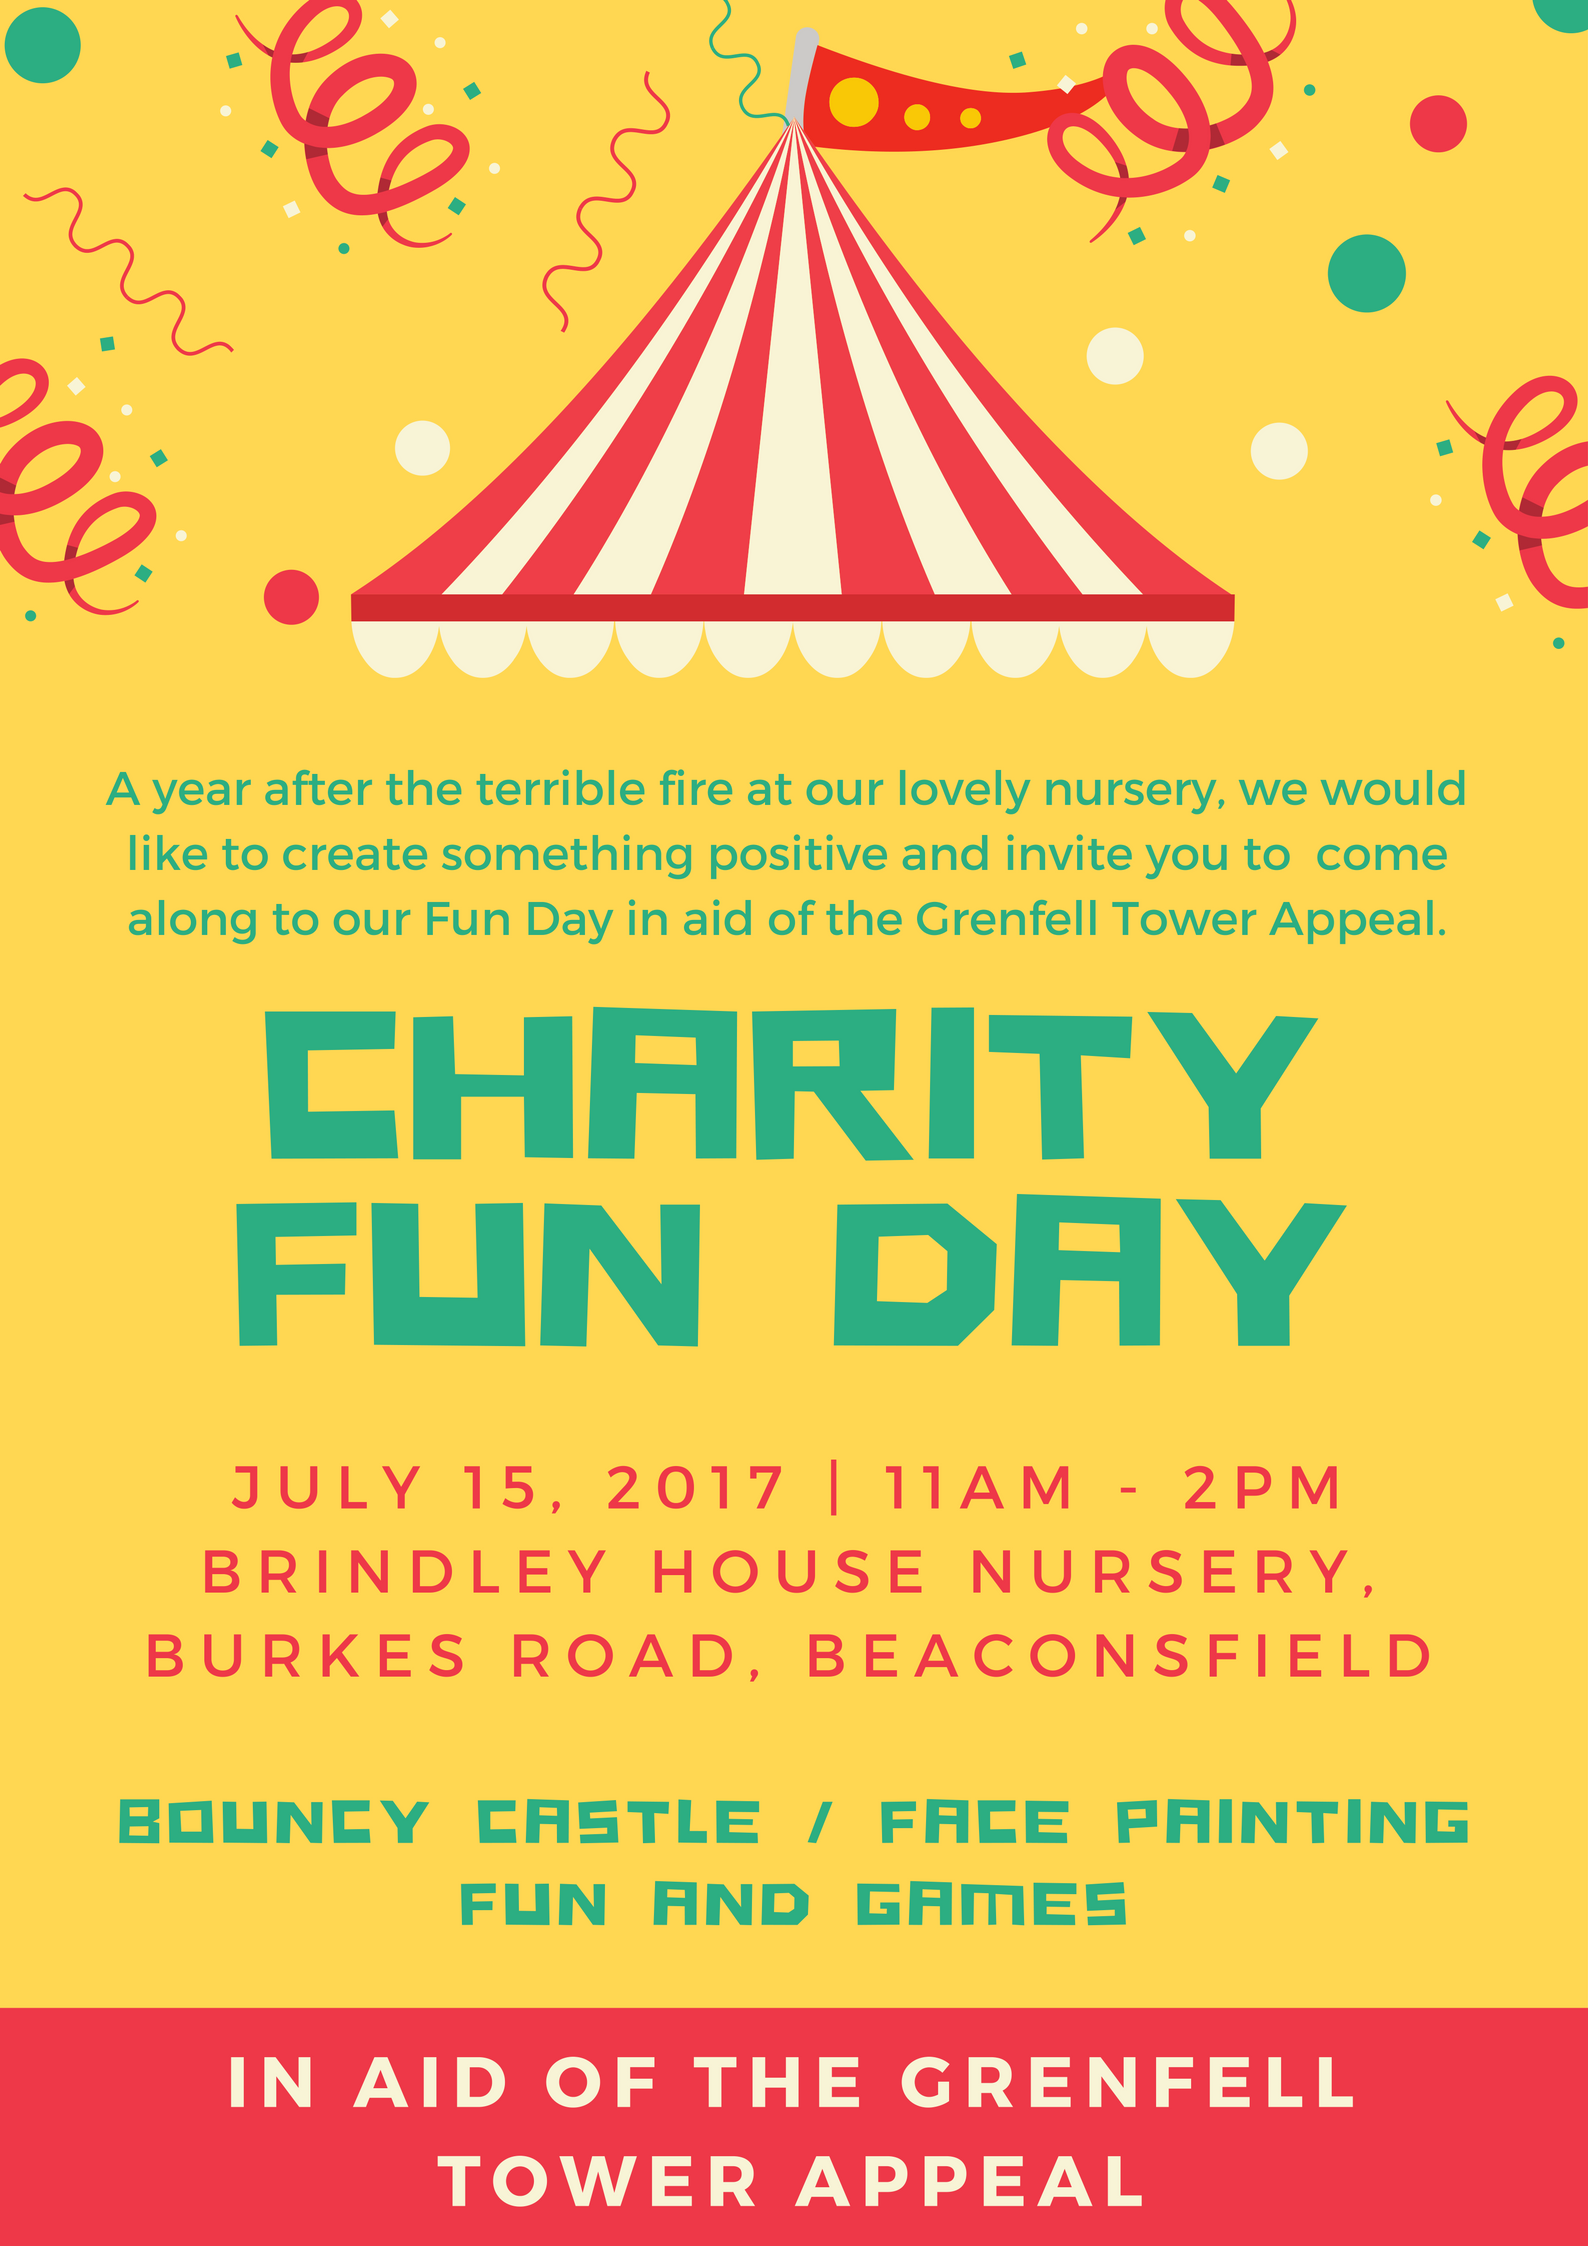 Charity Fun Day at Brindley House Nursery Beaconsfield